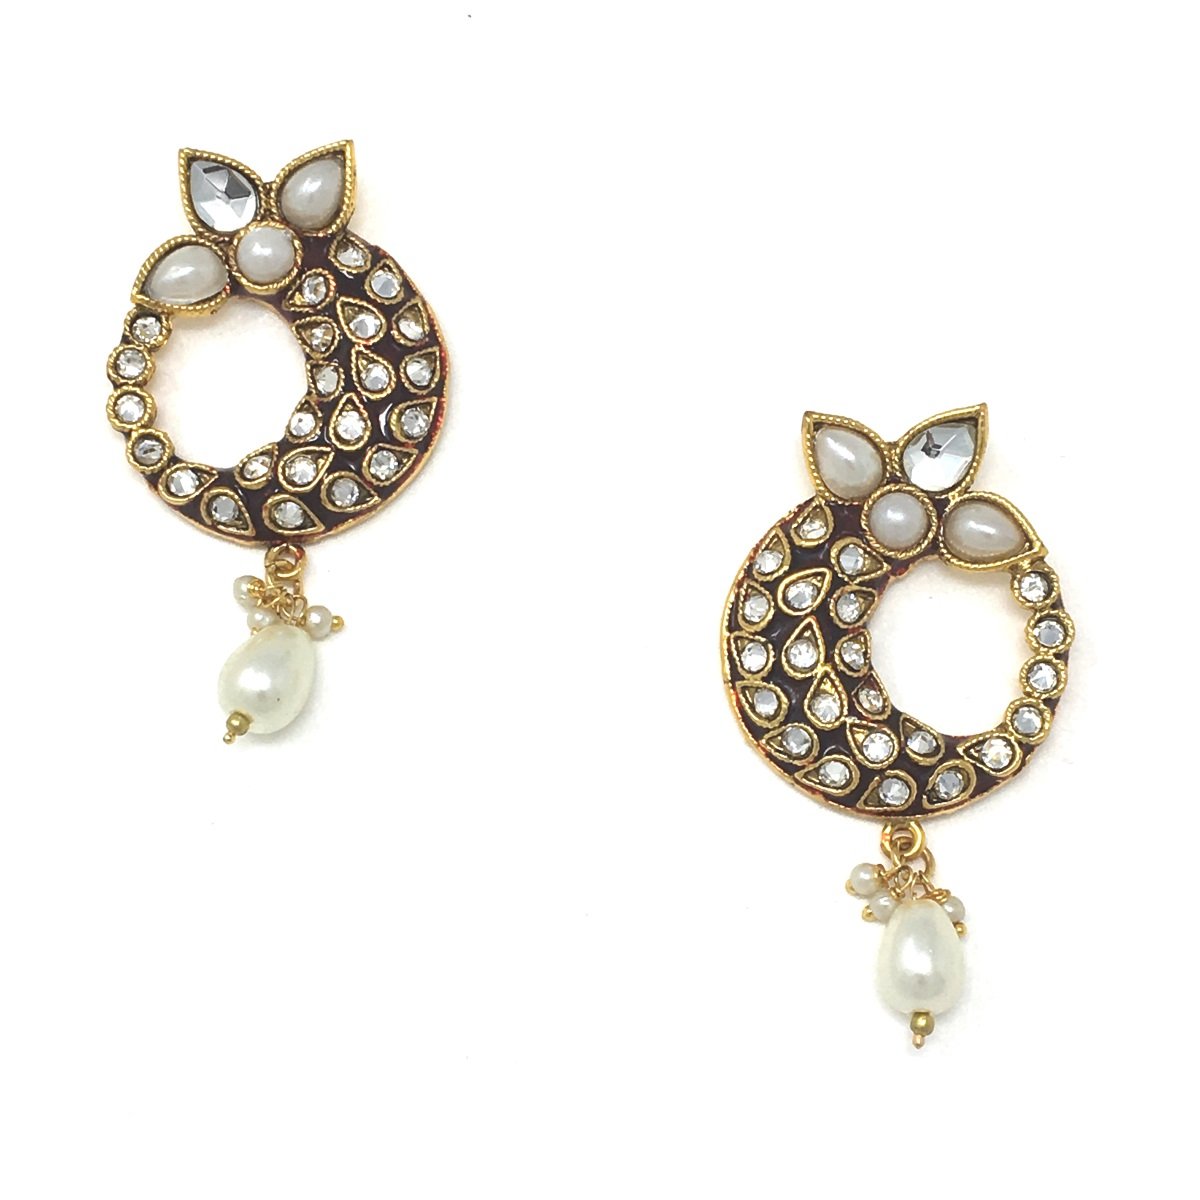 Gold Earrings with Embedded Stones on Maroon Base